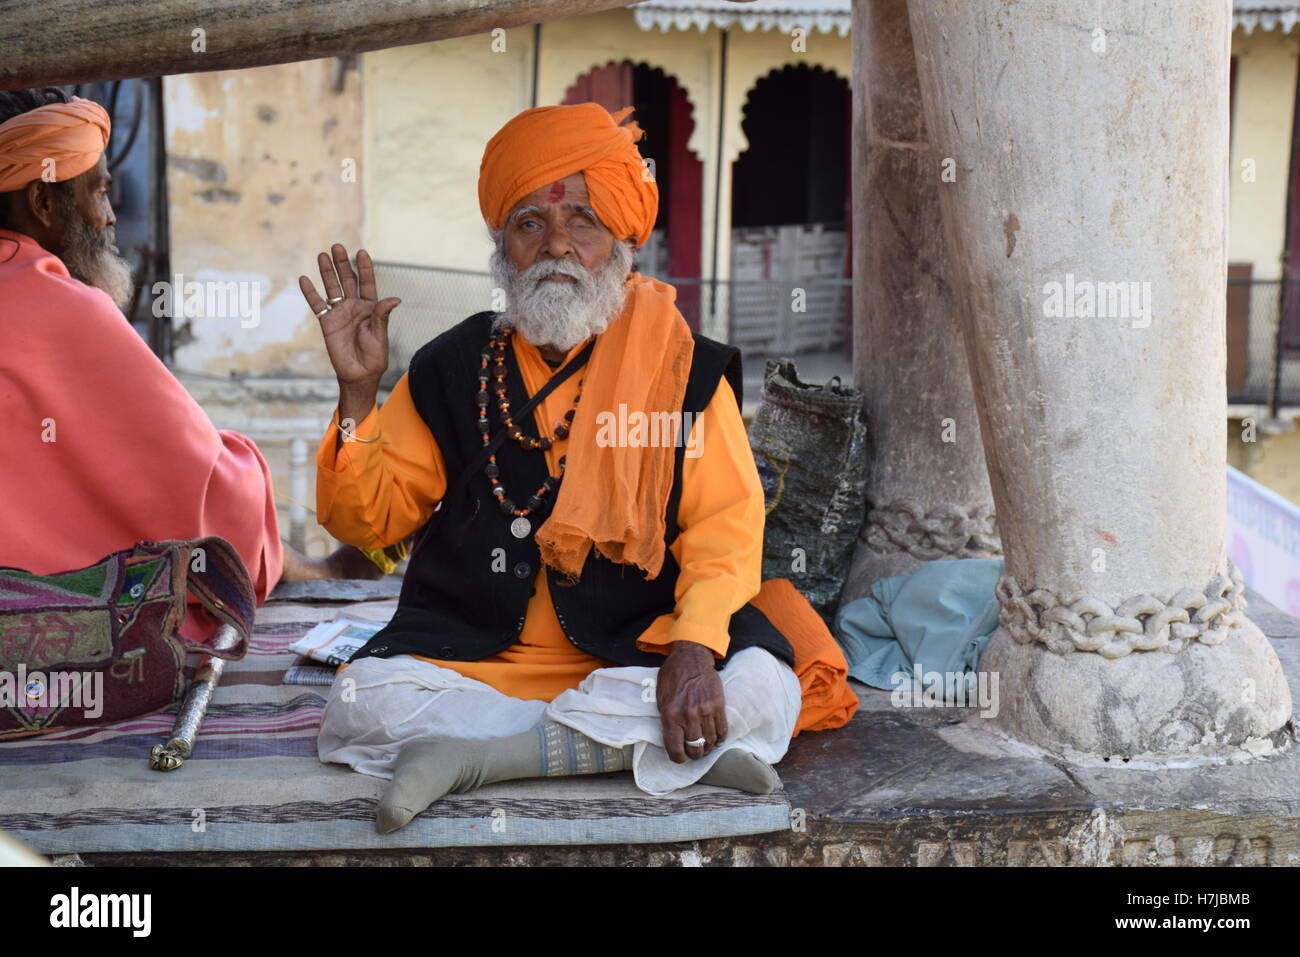 Indian man with beard and orange turban sitting outside a temple in Udaipur, Rajasthan, India Stock Photo